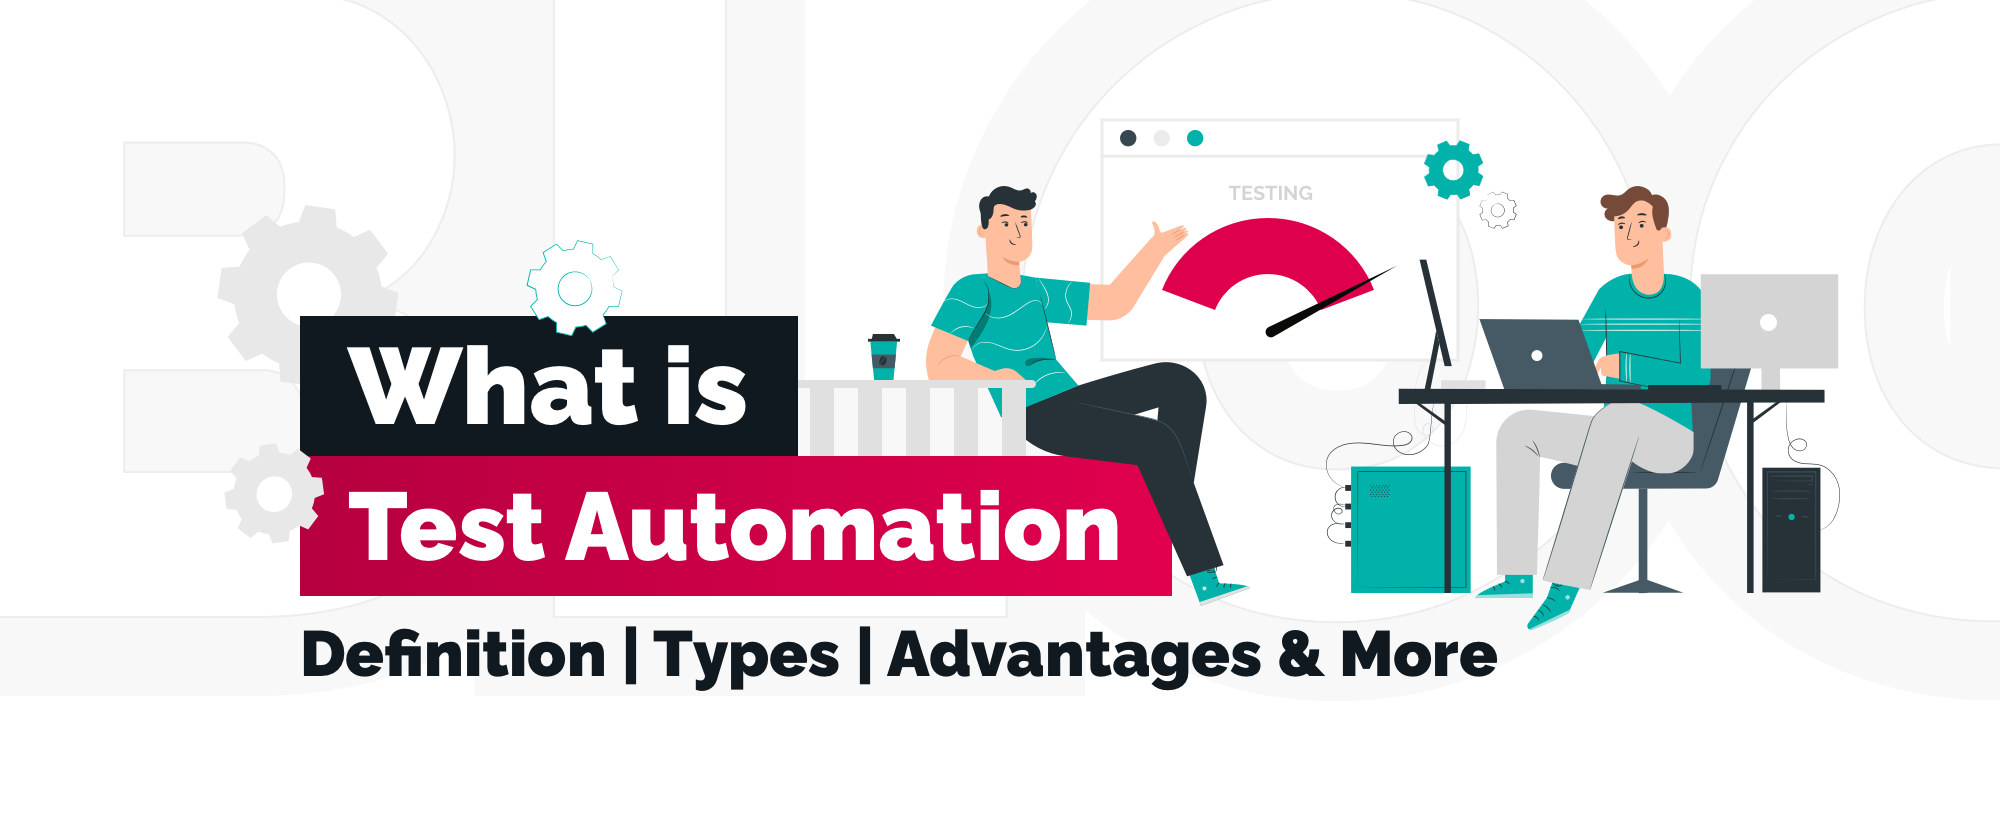 What is Test Automation: Definition, Types, Advantages & More